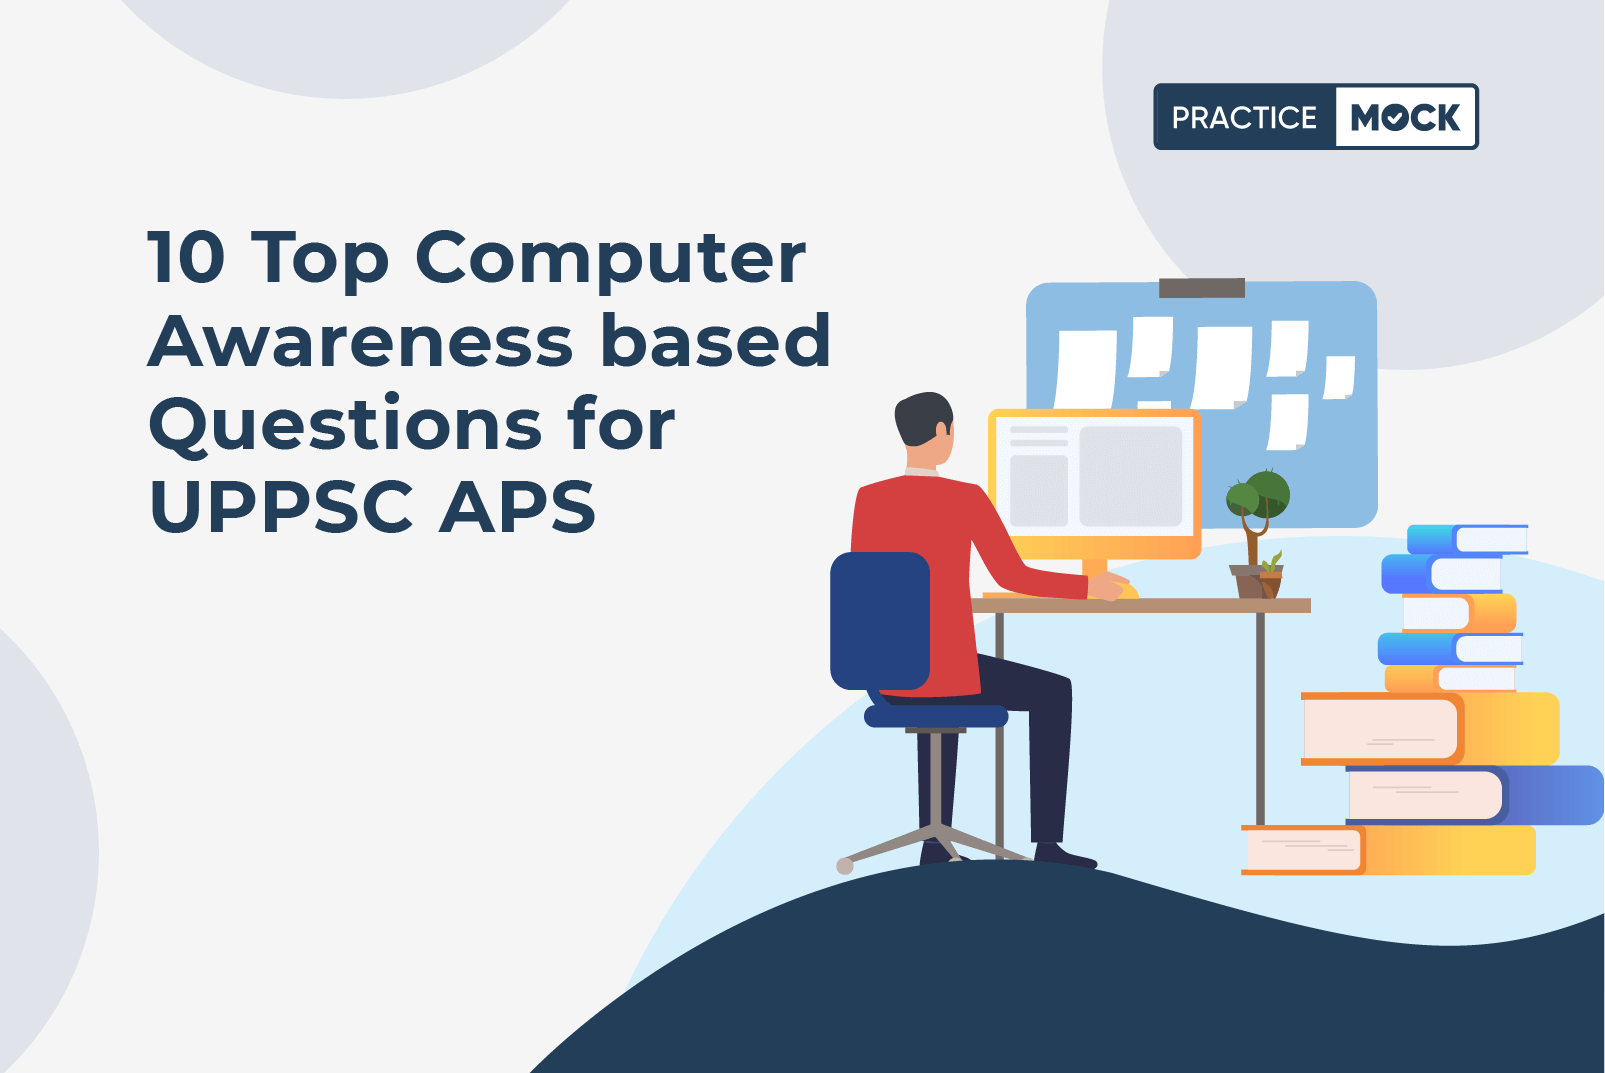 10 Top Computer Awareness based Questions for UPPSC APS